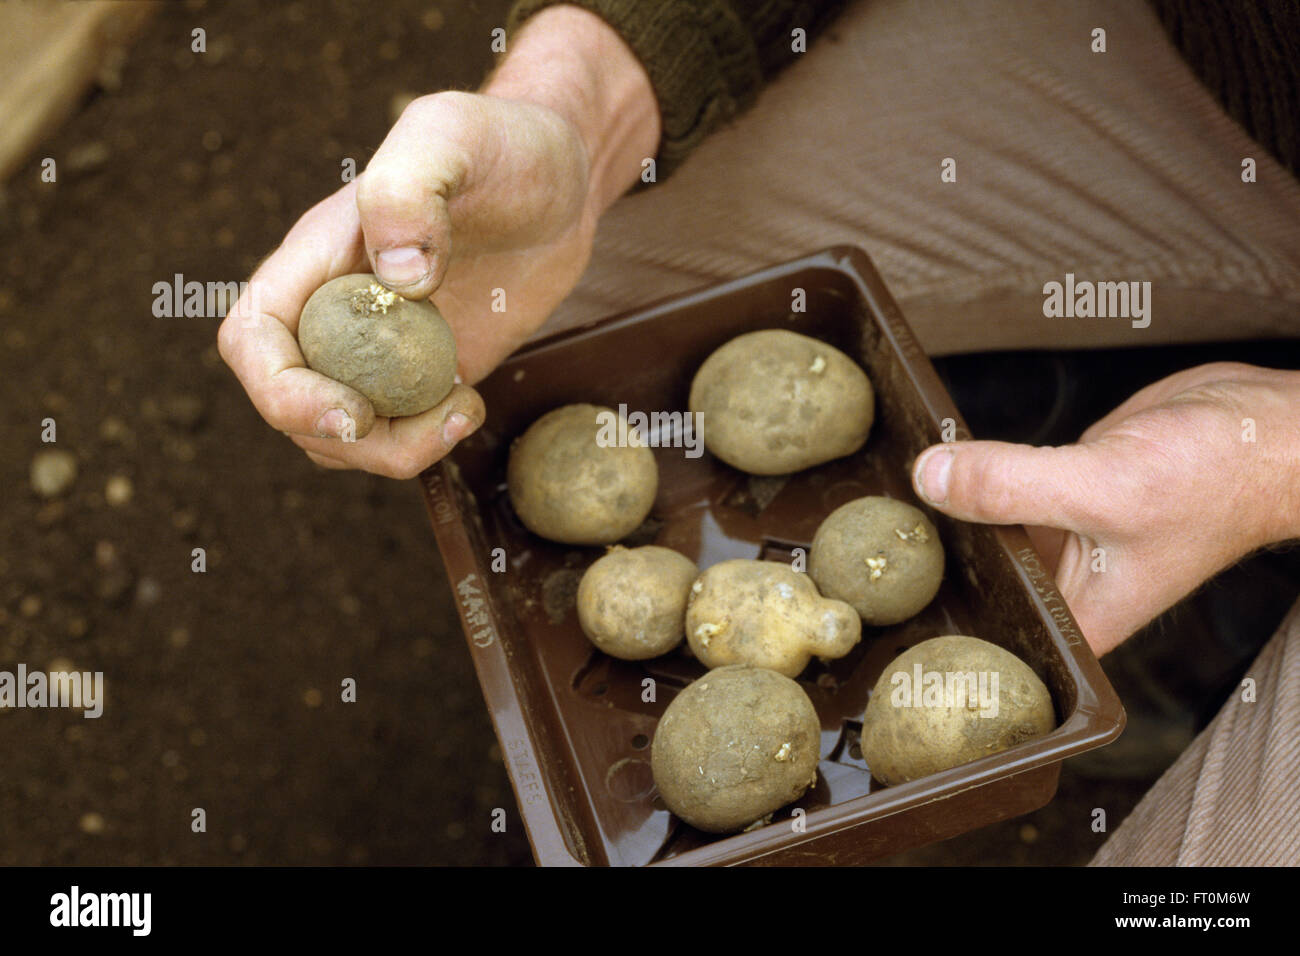 Close-up of a gardener with a small box of chitted potatoes Stock Photo